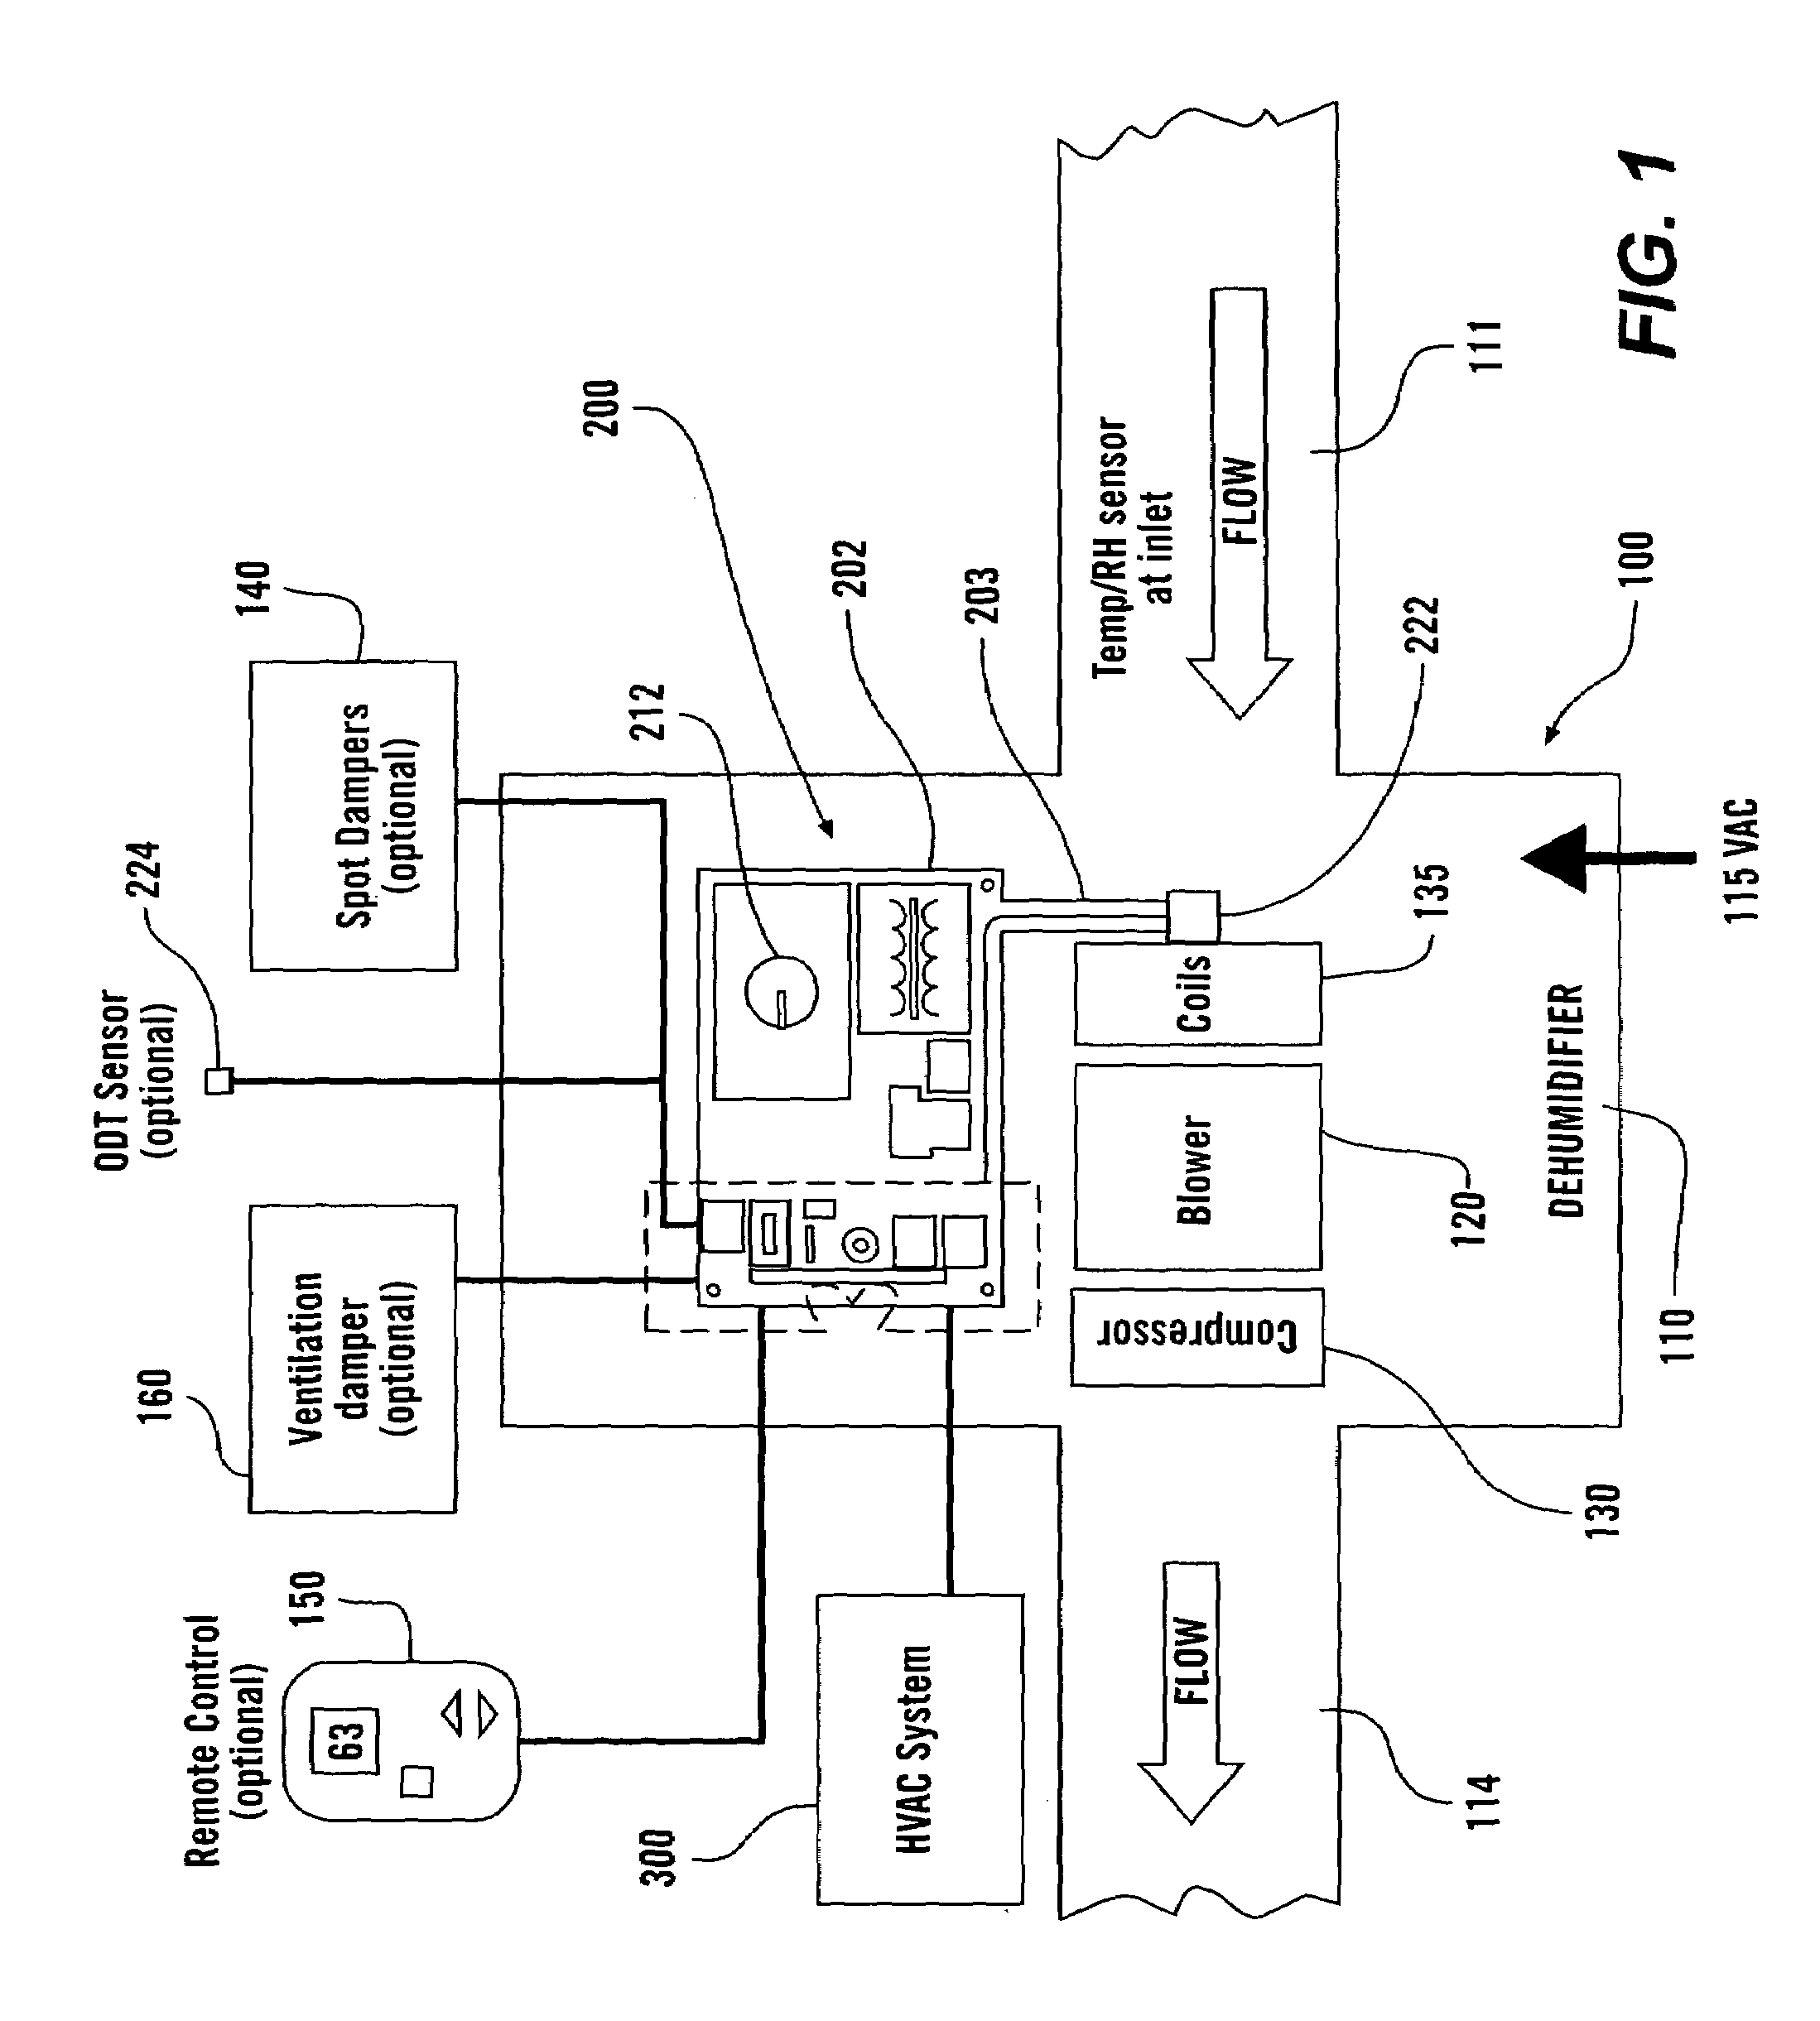 Systems and methods for whole-house dehumidification based on dew point measurements